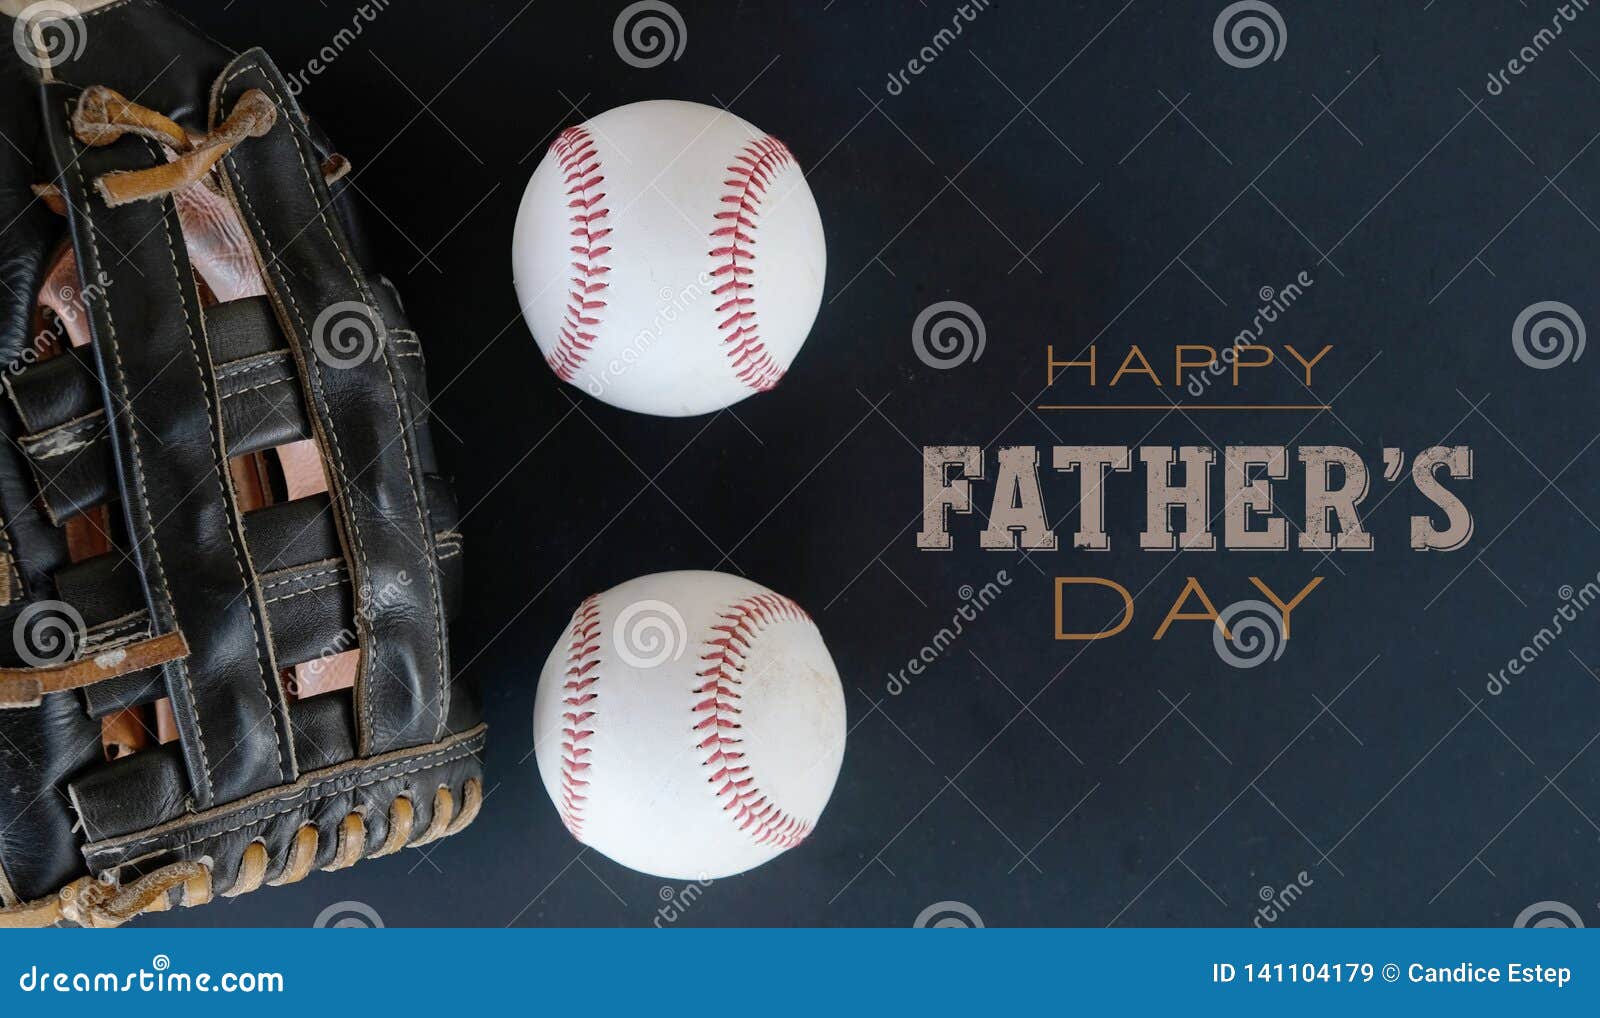 Happy fathers day baseball holiday graphic with handwritten style